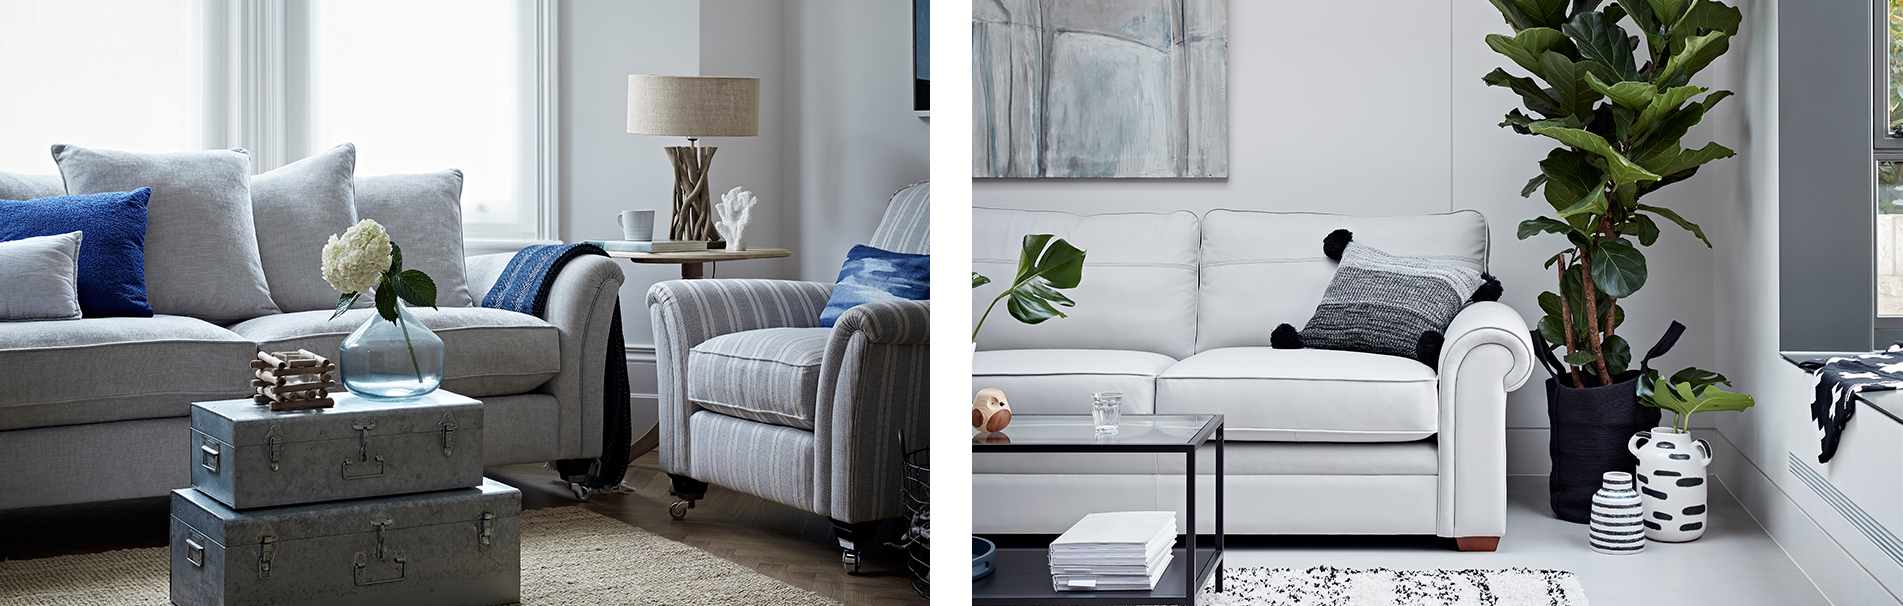 Fabric or Leather sofa: which should I choose?